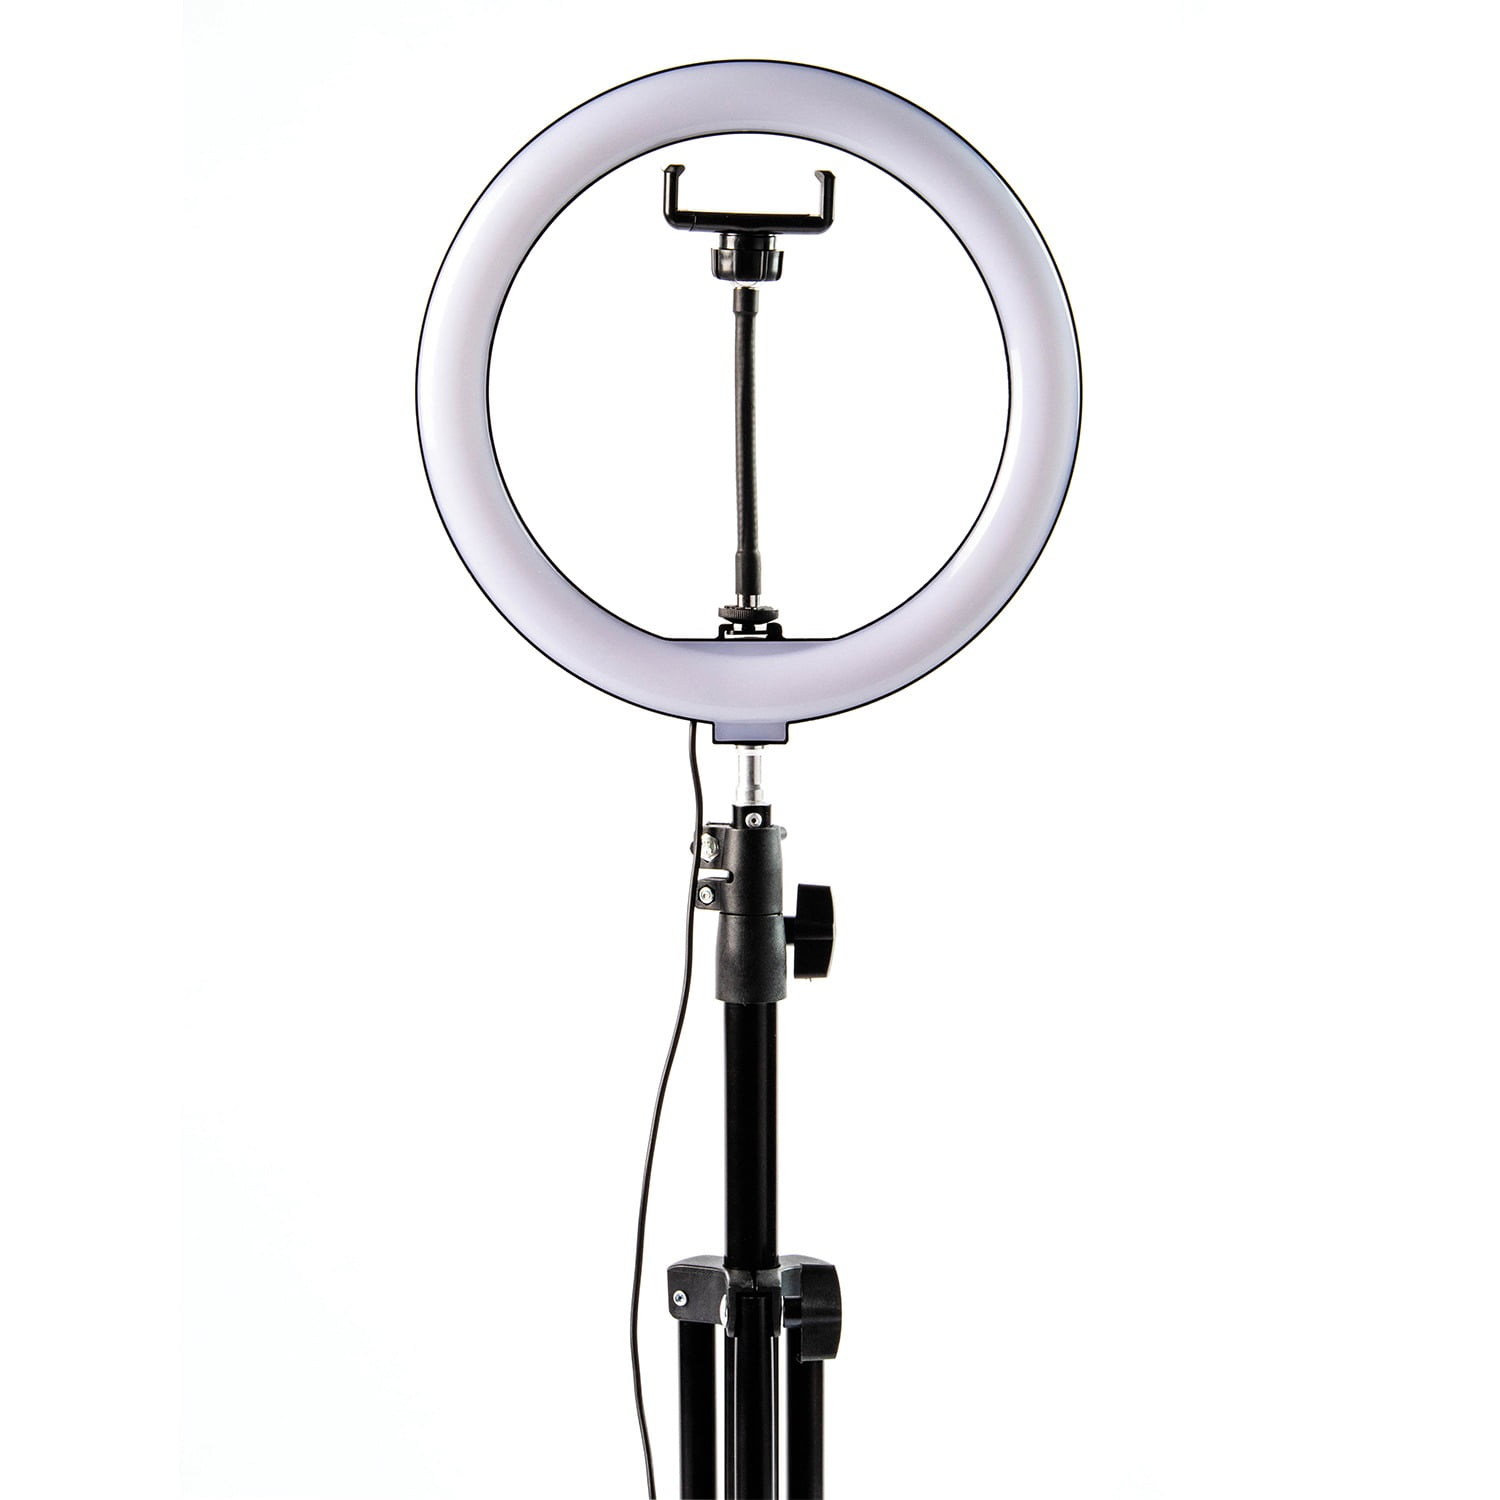 HQ 18 Inch SMD LED Ring Lighting Dimmable studio Live For Photo Video  YouTube | eBay